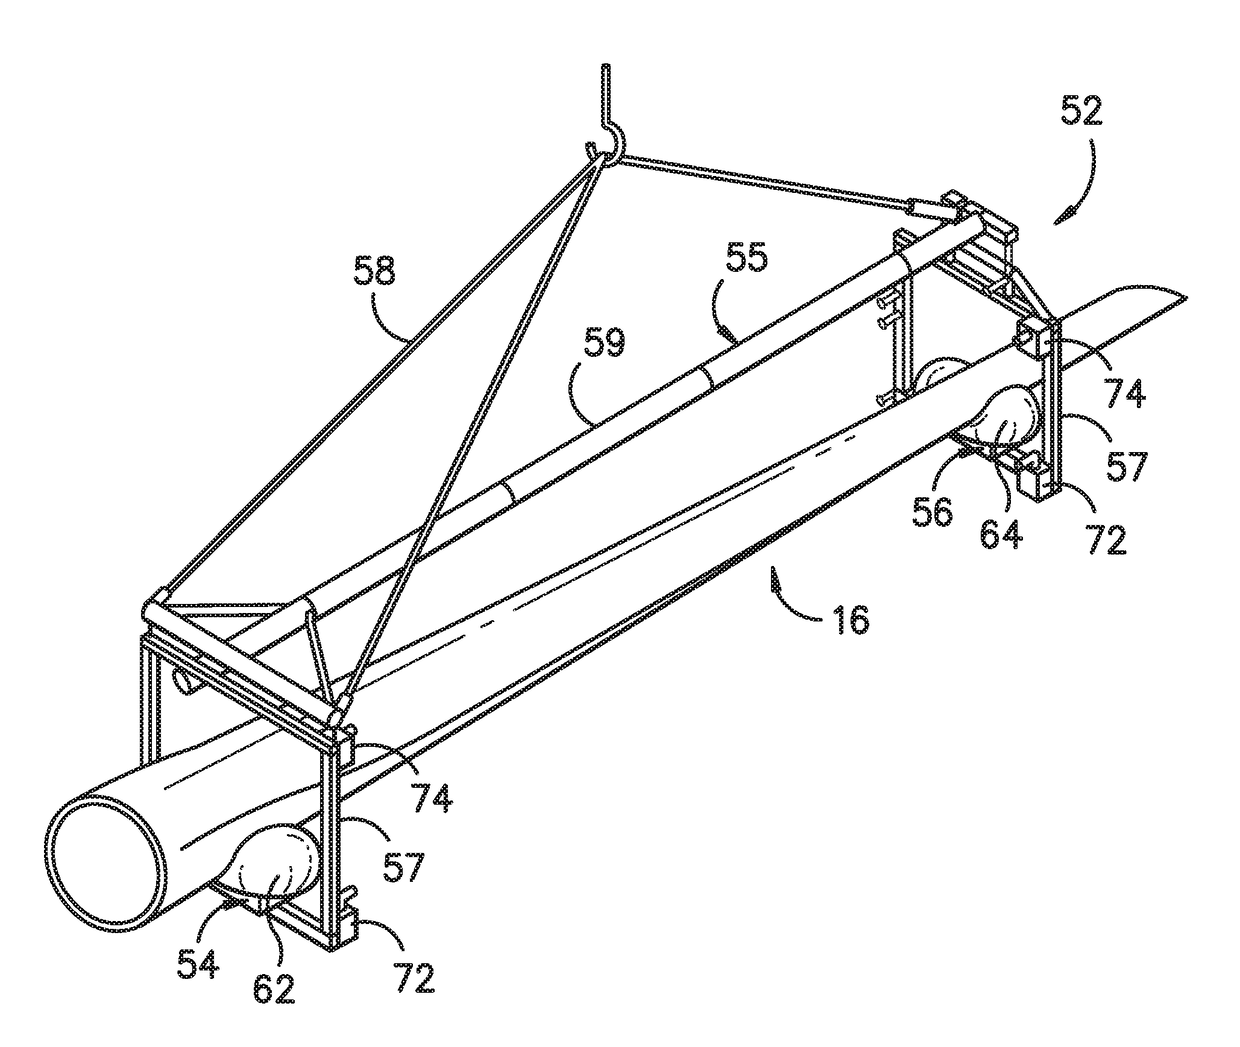 Handling device for a wind turbine rotor blade having a moldable support pad